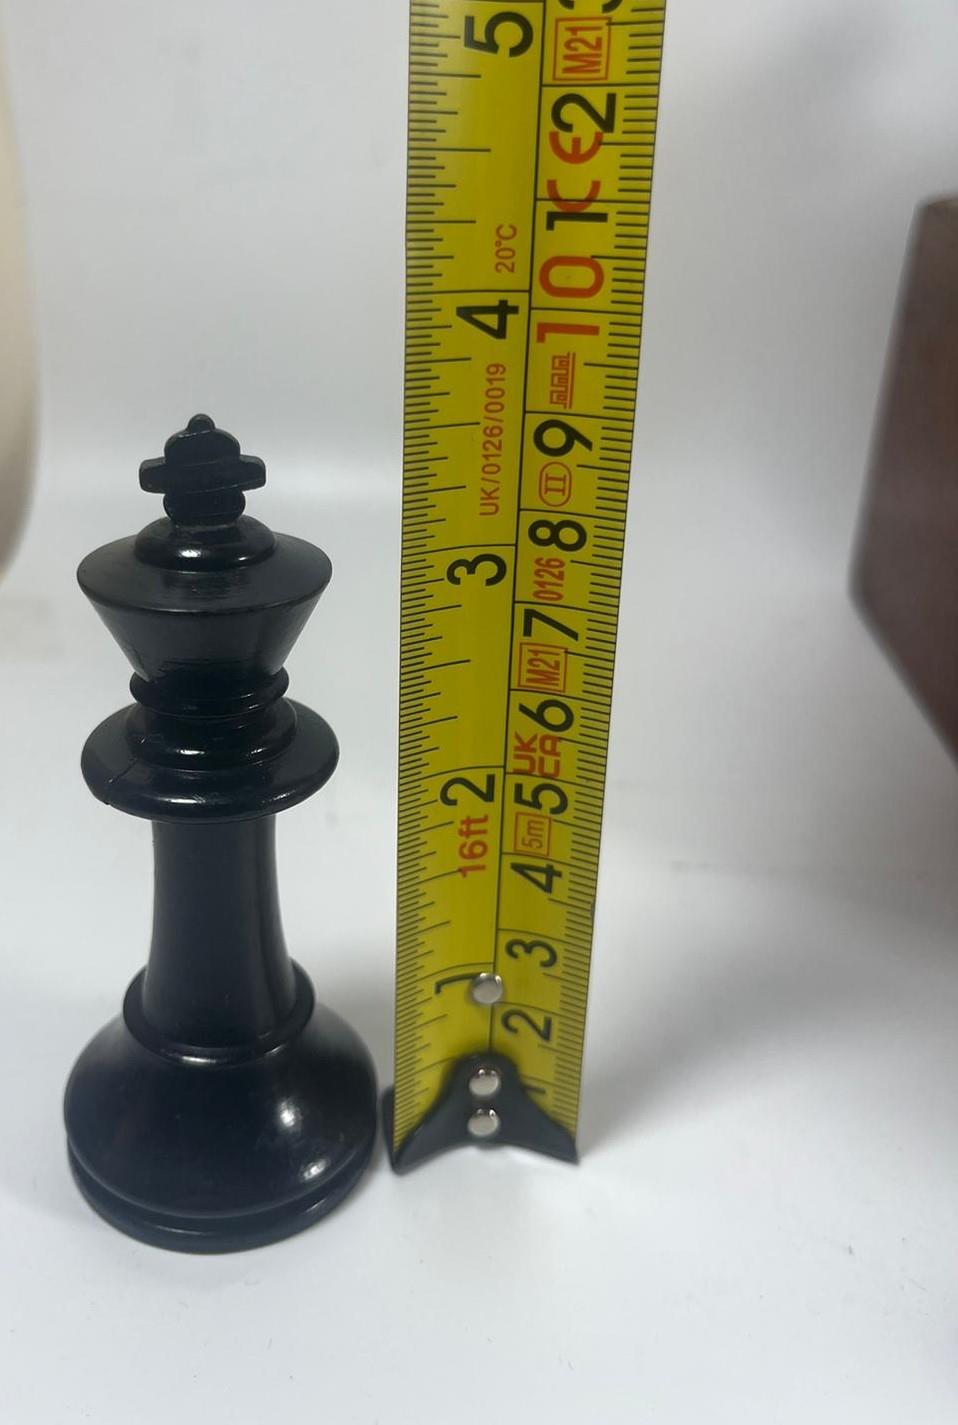 A VINTAGE EBONY AND BOXWOOD STAUNTON CHESS SET IN VINTAGE WOODEN BOX, KING HEIGHT 9 CM - Image 6 of 6